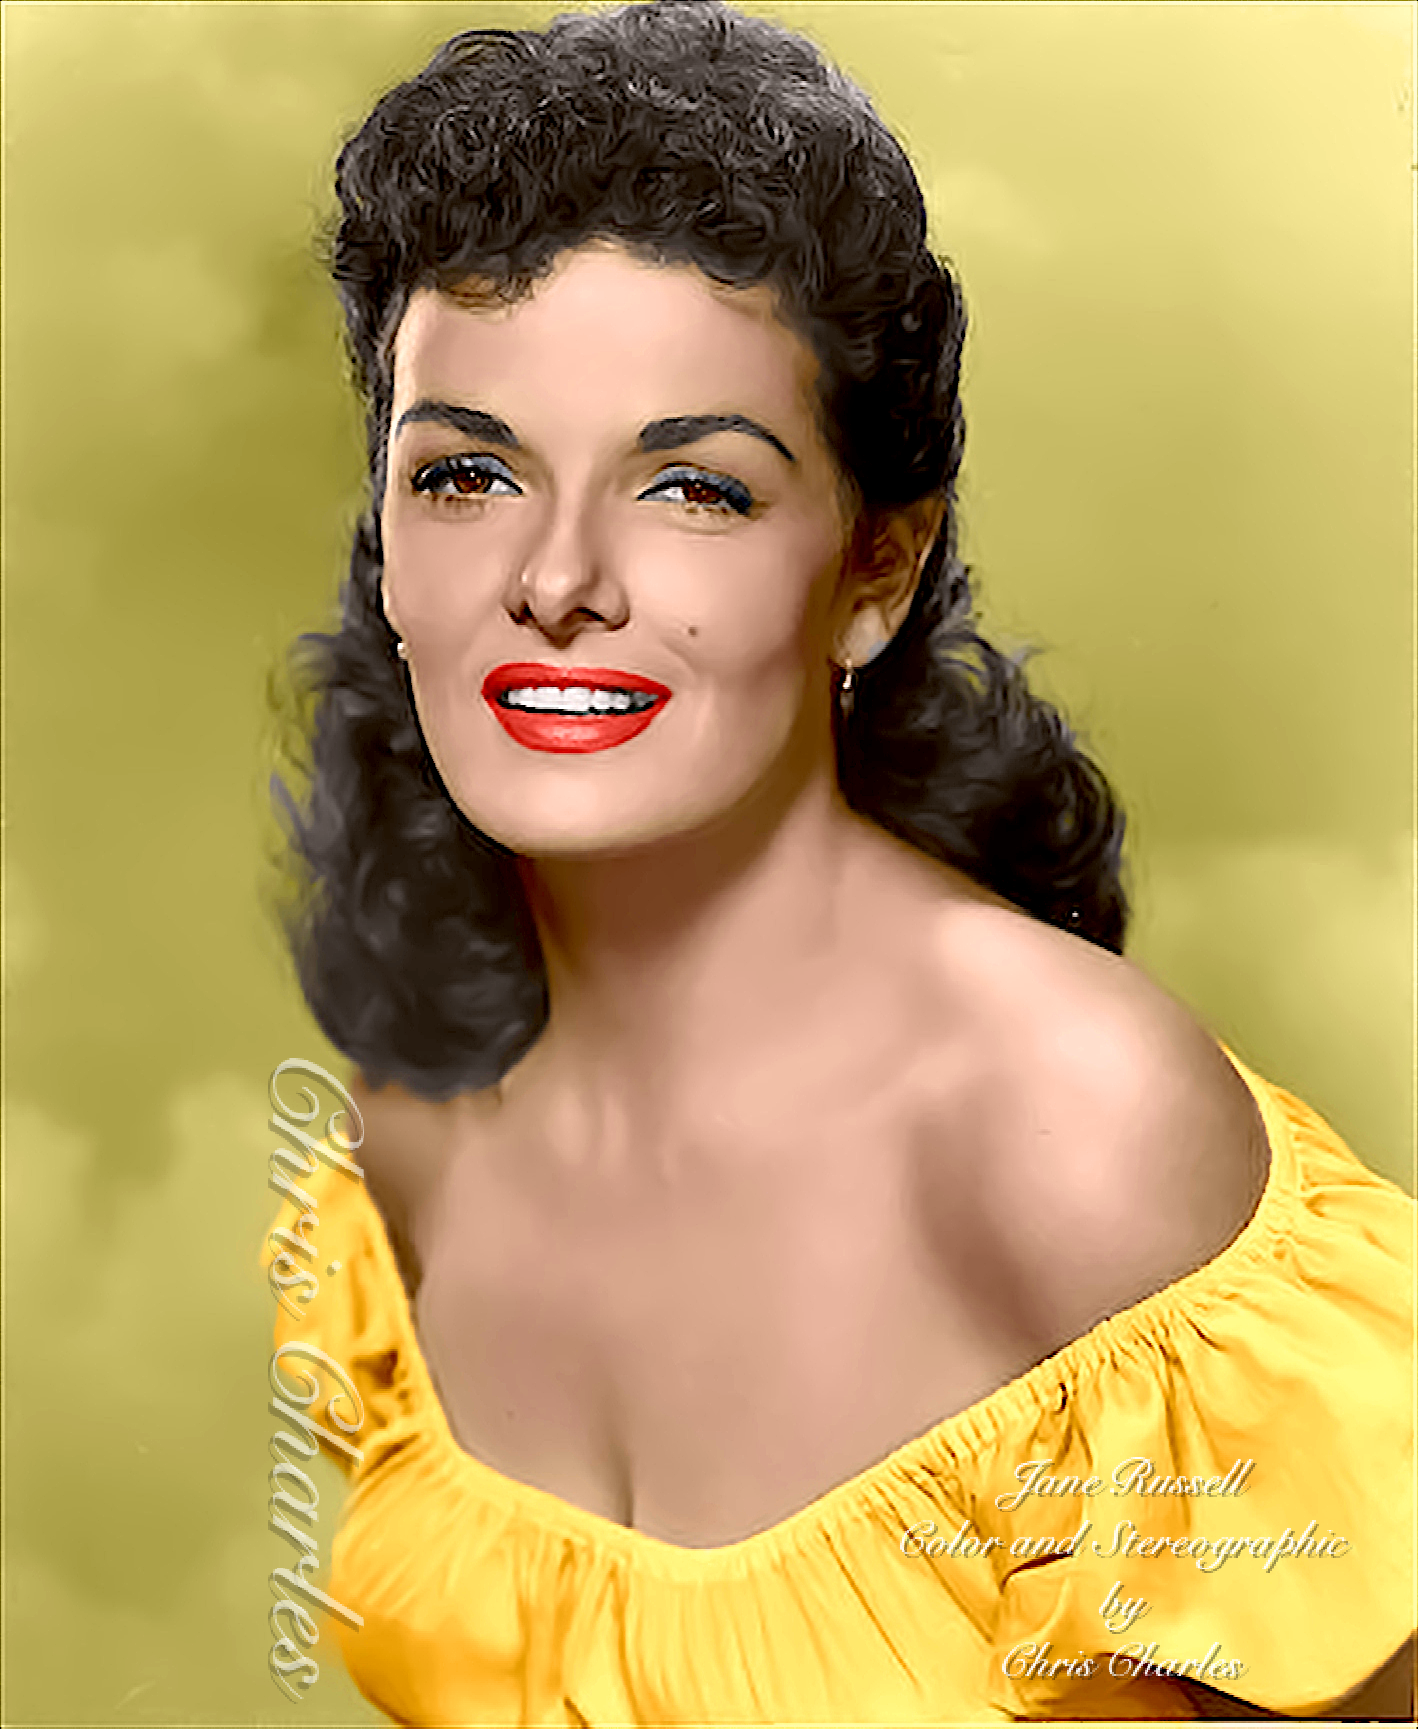 Jane Russell. Jane russell, Hollywood icons, Celebrity artwork